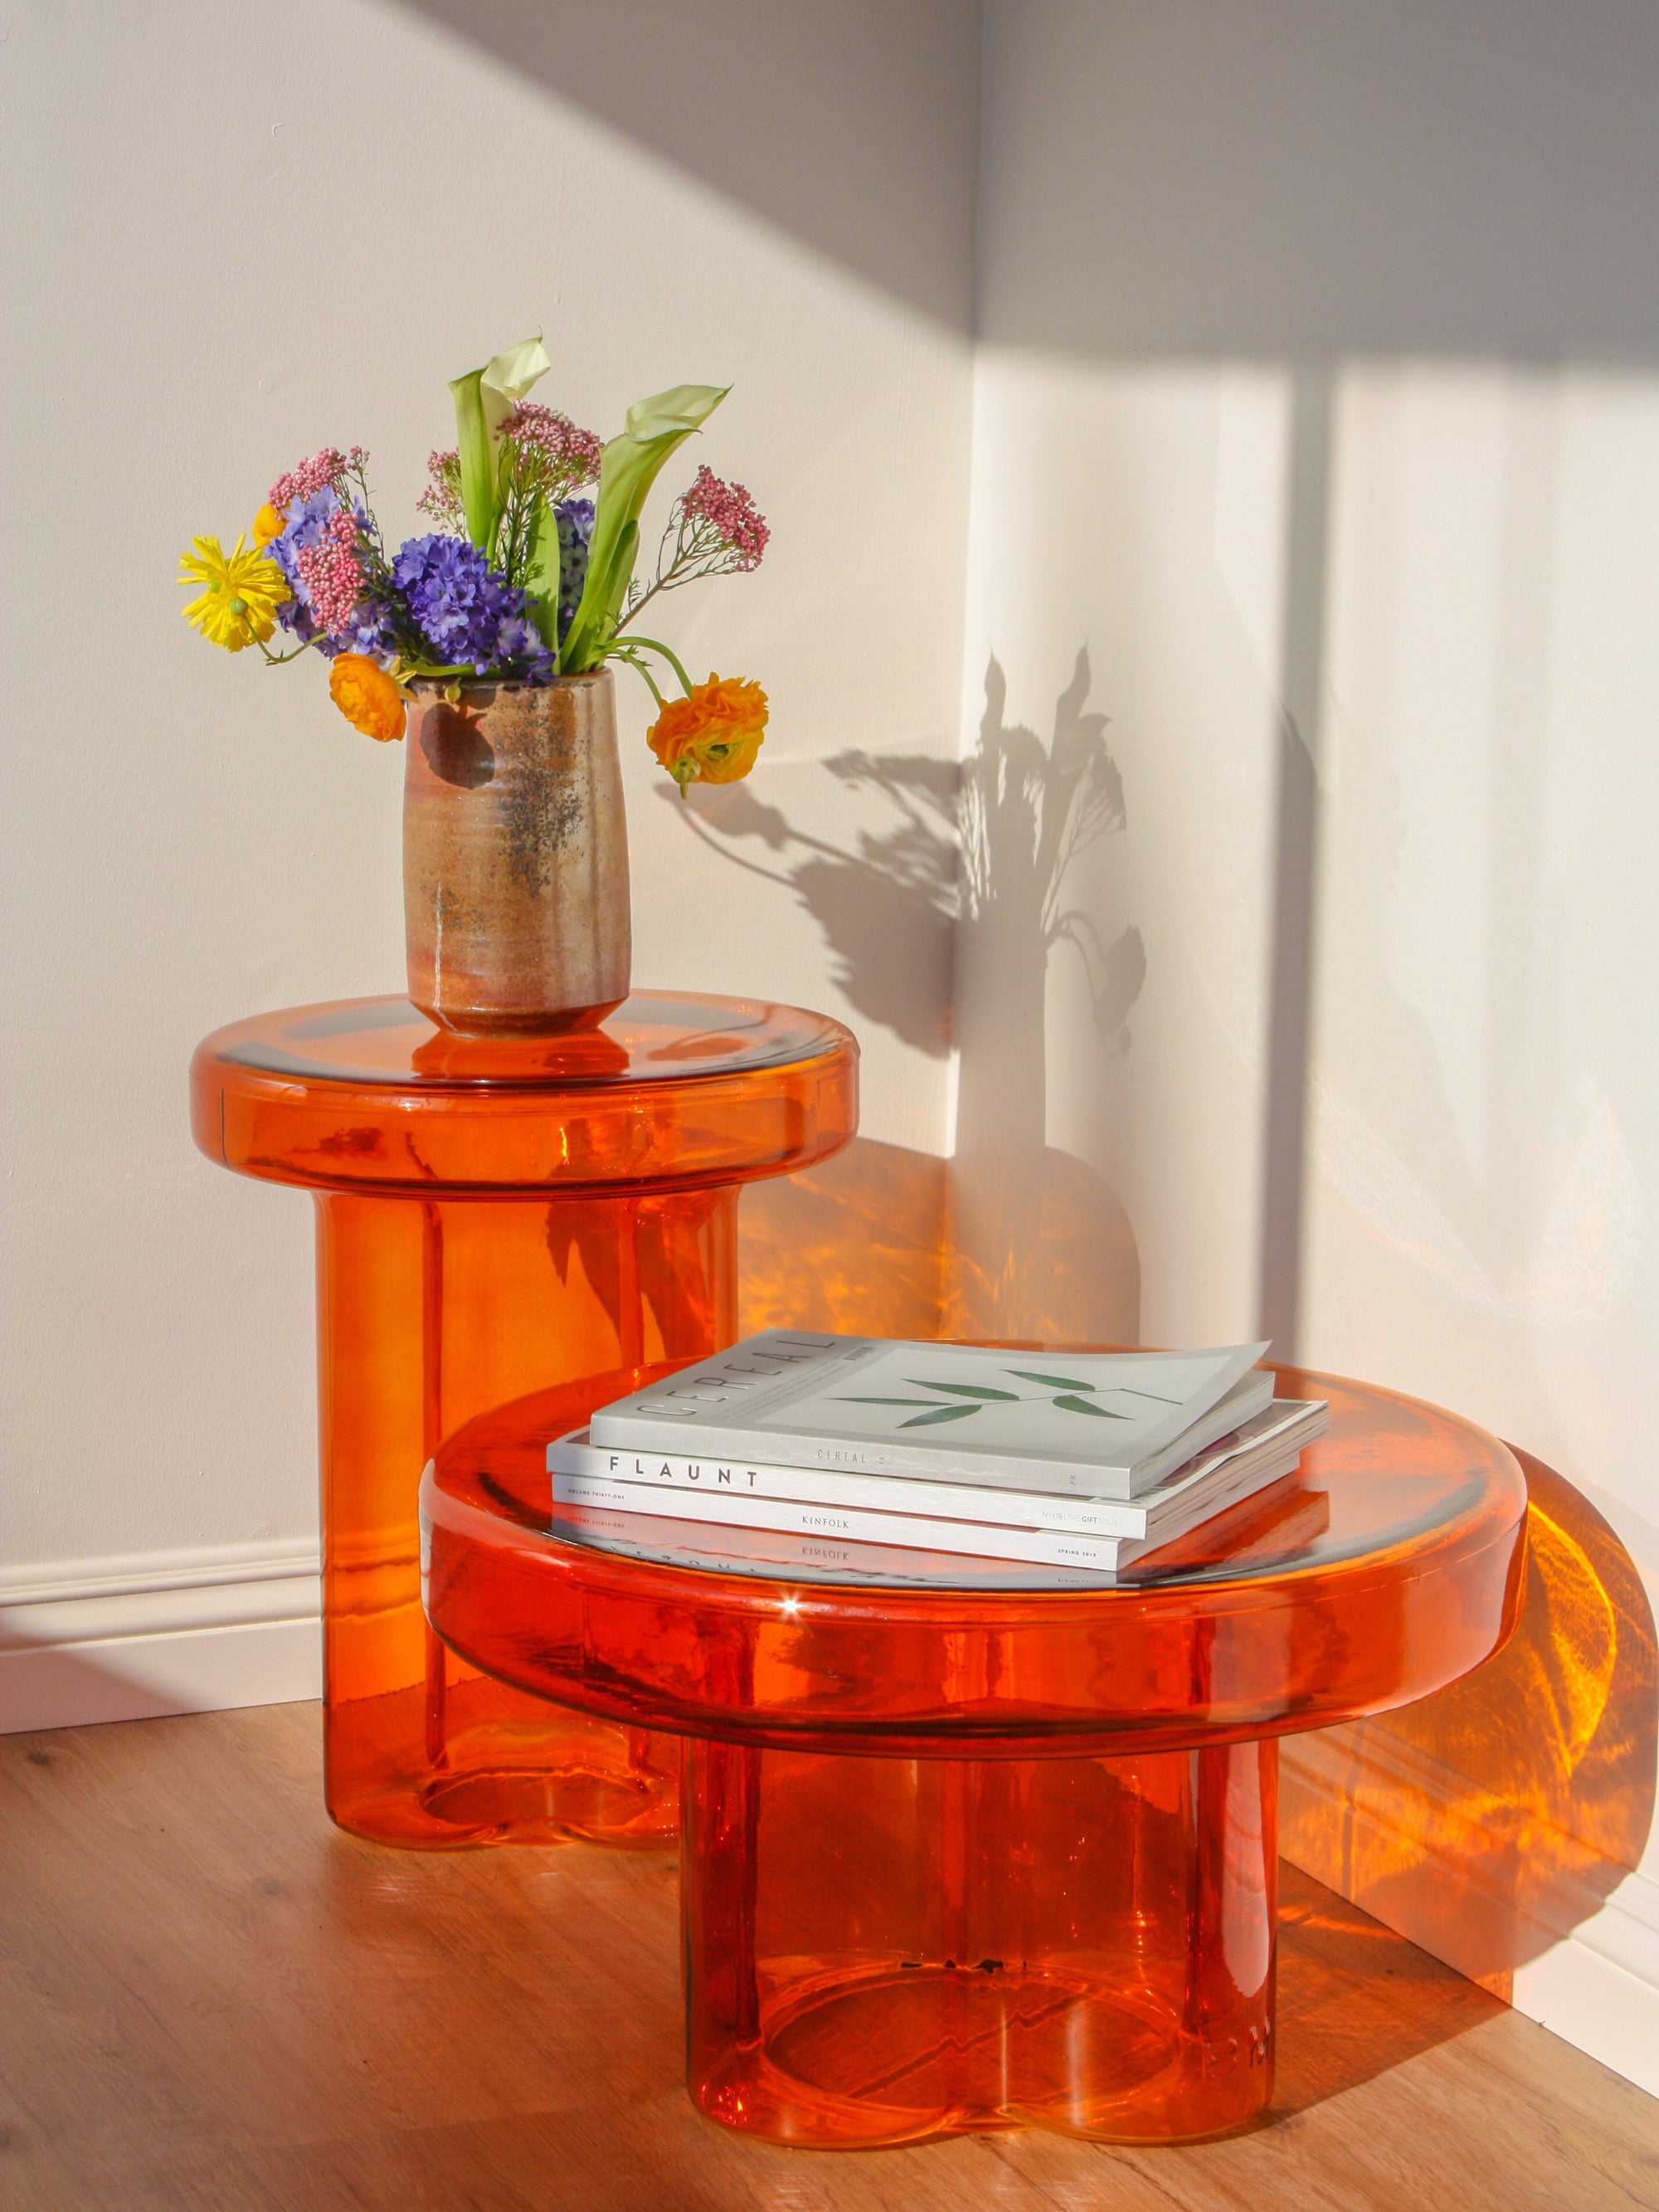 Glass Soda End Table Dupe - Miniforms Coffee Table Dupe - Orange, Wide Glass Pedestal Coffee Table